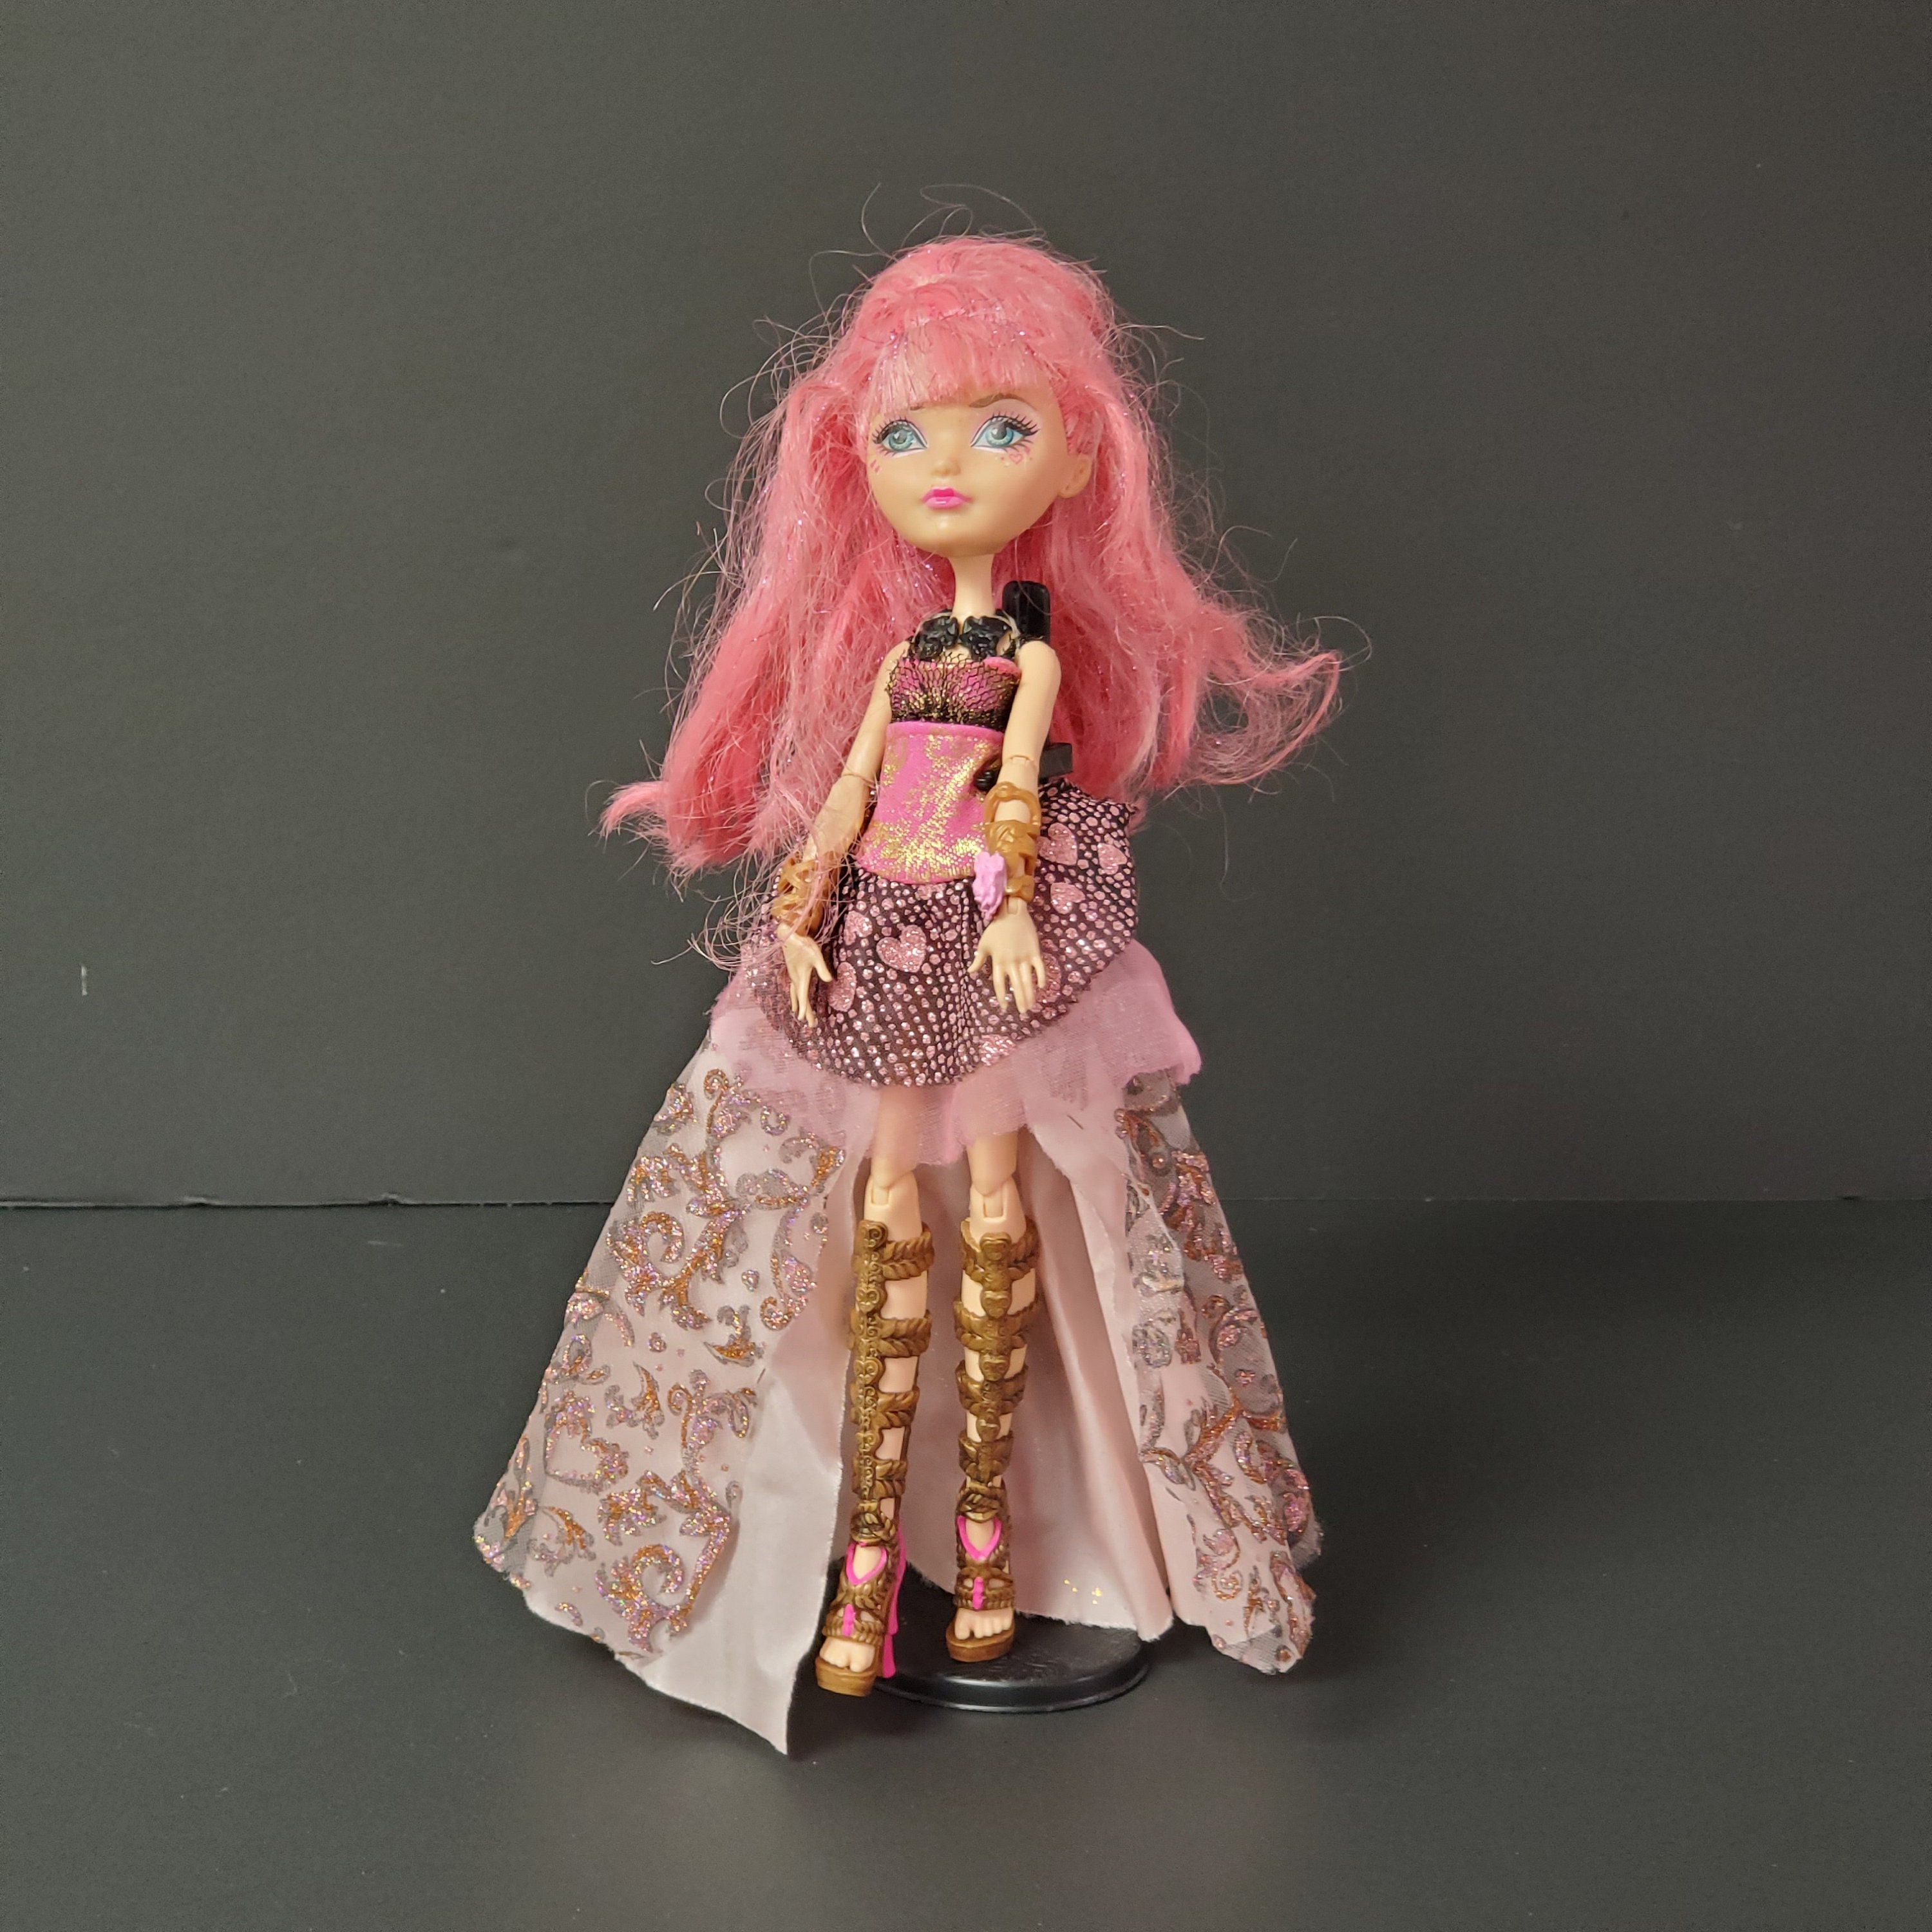 C. A. Cupid Doll from Ever After High! 